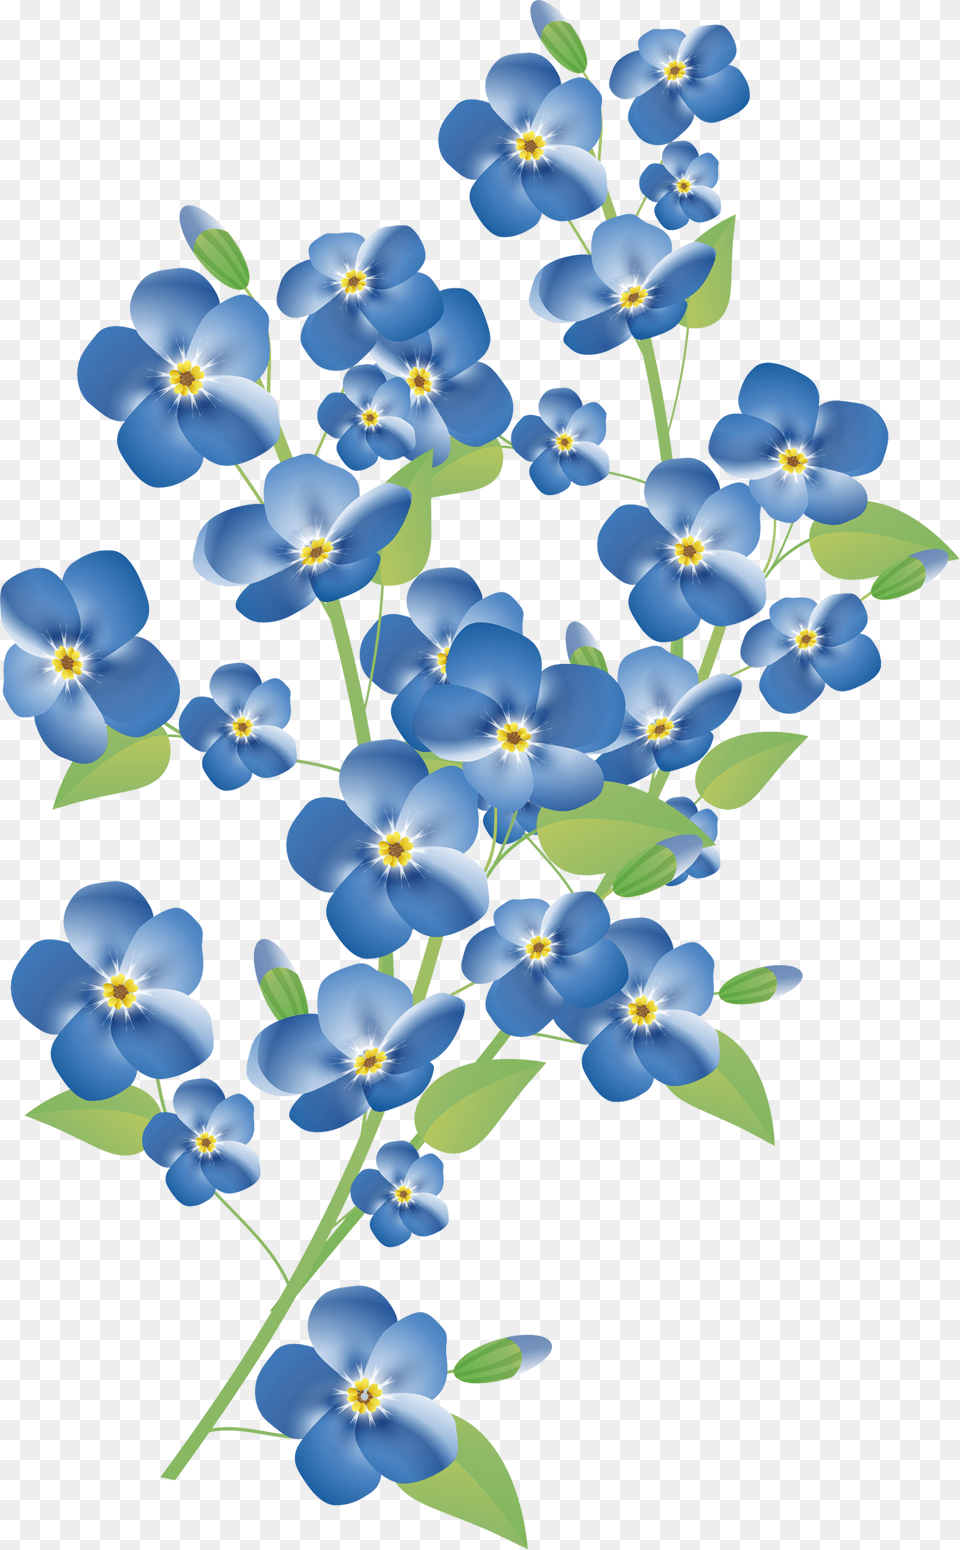 Forget Me Not Pic Forget Me Not Flower, Plant, Anemone, Art, Graphics Png Image